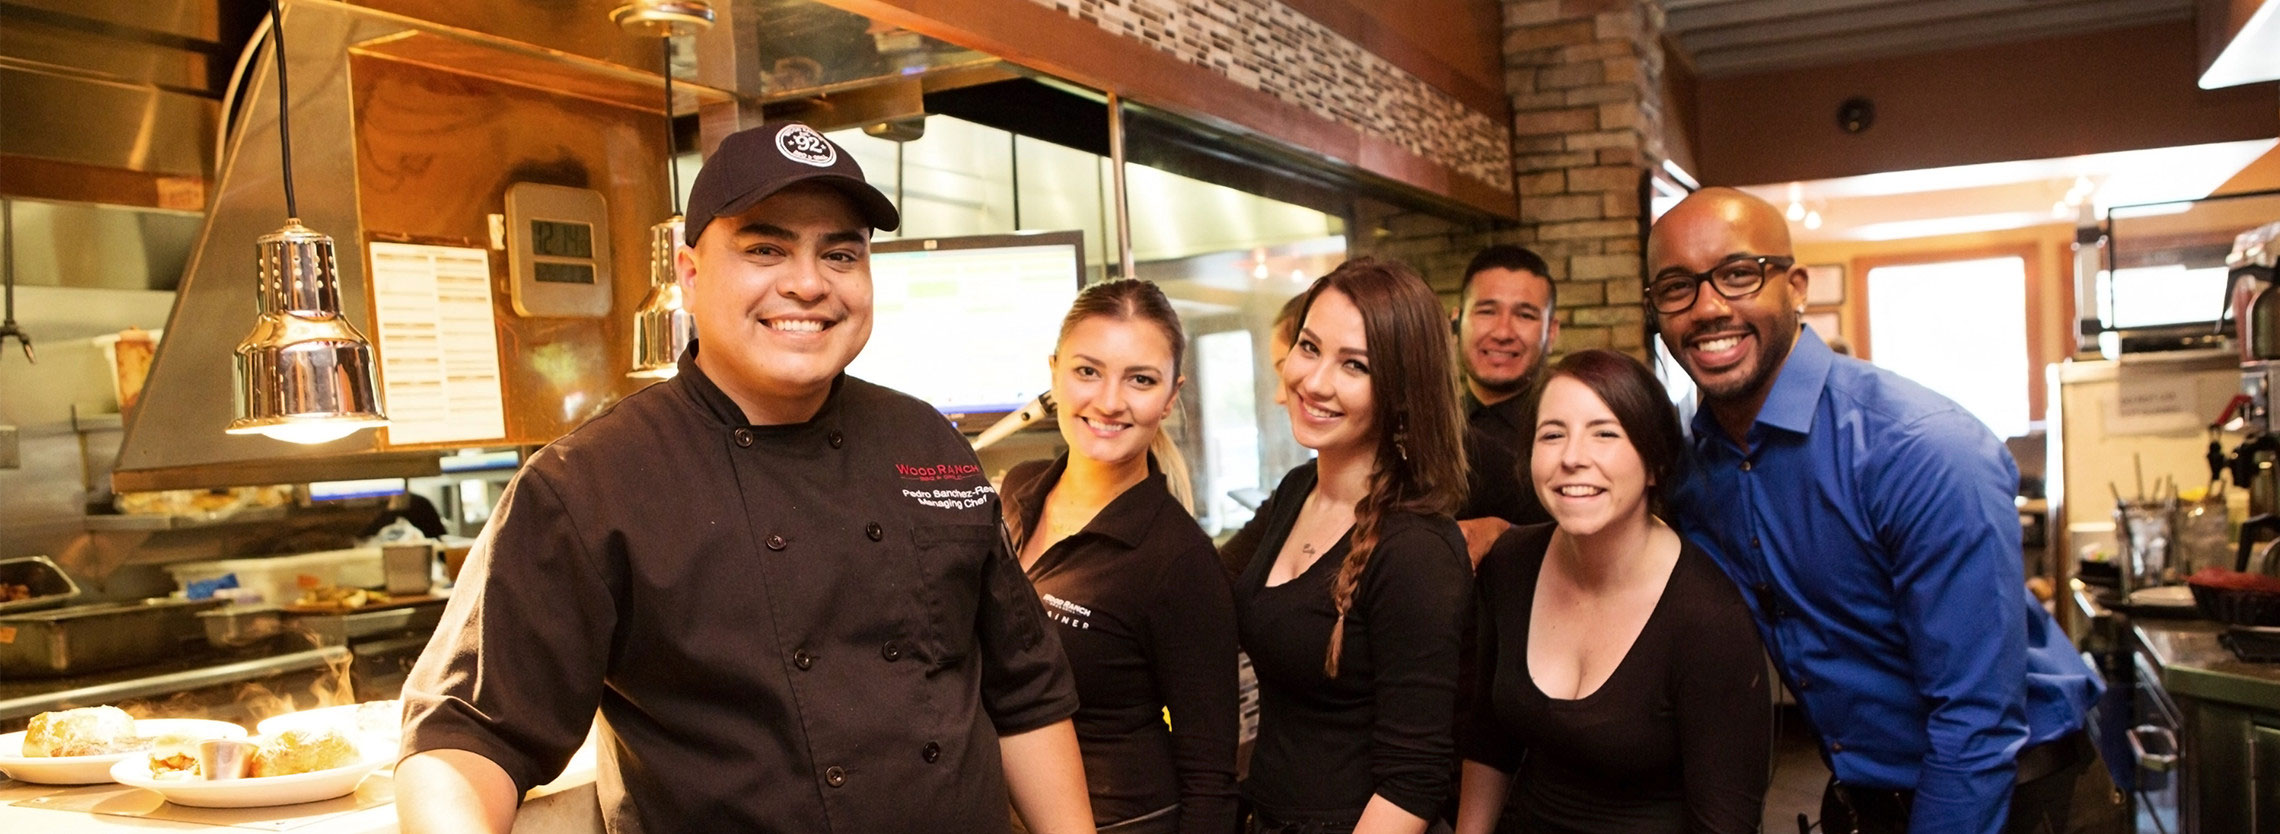 group of six restaurant staff members posing for a photo in a bustling kitchen environment. From left to right: a chef in a black uniform and cap is smiling at the camera; next to him stands a female server with her hair pulled back, smiling as well. Another server stands slightly behind them, only partly visible. In the middle, a female server with long braided hair is grinning, with another female server in front, also smiling. On the far right, a man in a blue dress shirt and glasses is leaning in, smiling with the group. In the foreground, there are plates of food ready to be served, and the background suggests a warm, inviting atmosphere with a brick wall and a softly lit dining area. The staff exude a friendly and welcoming vibe.